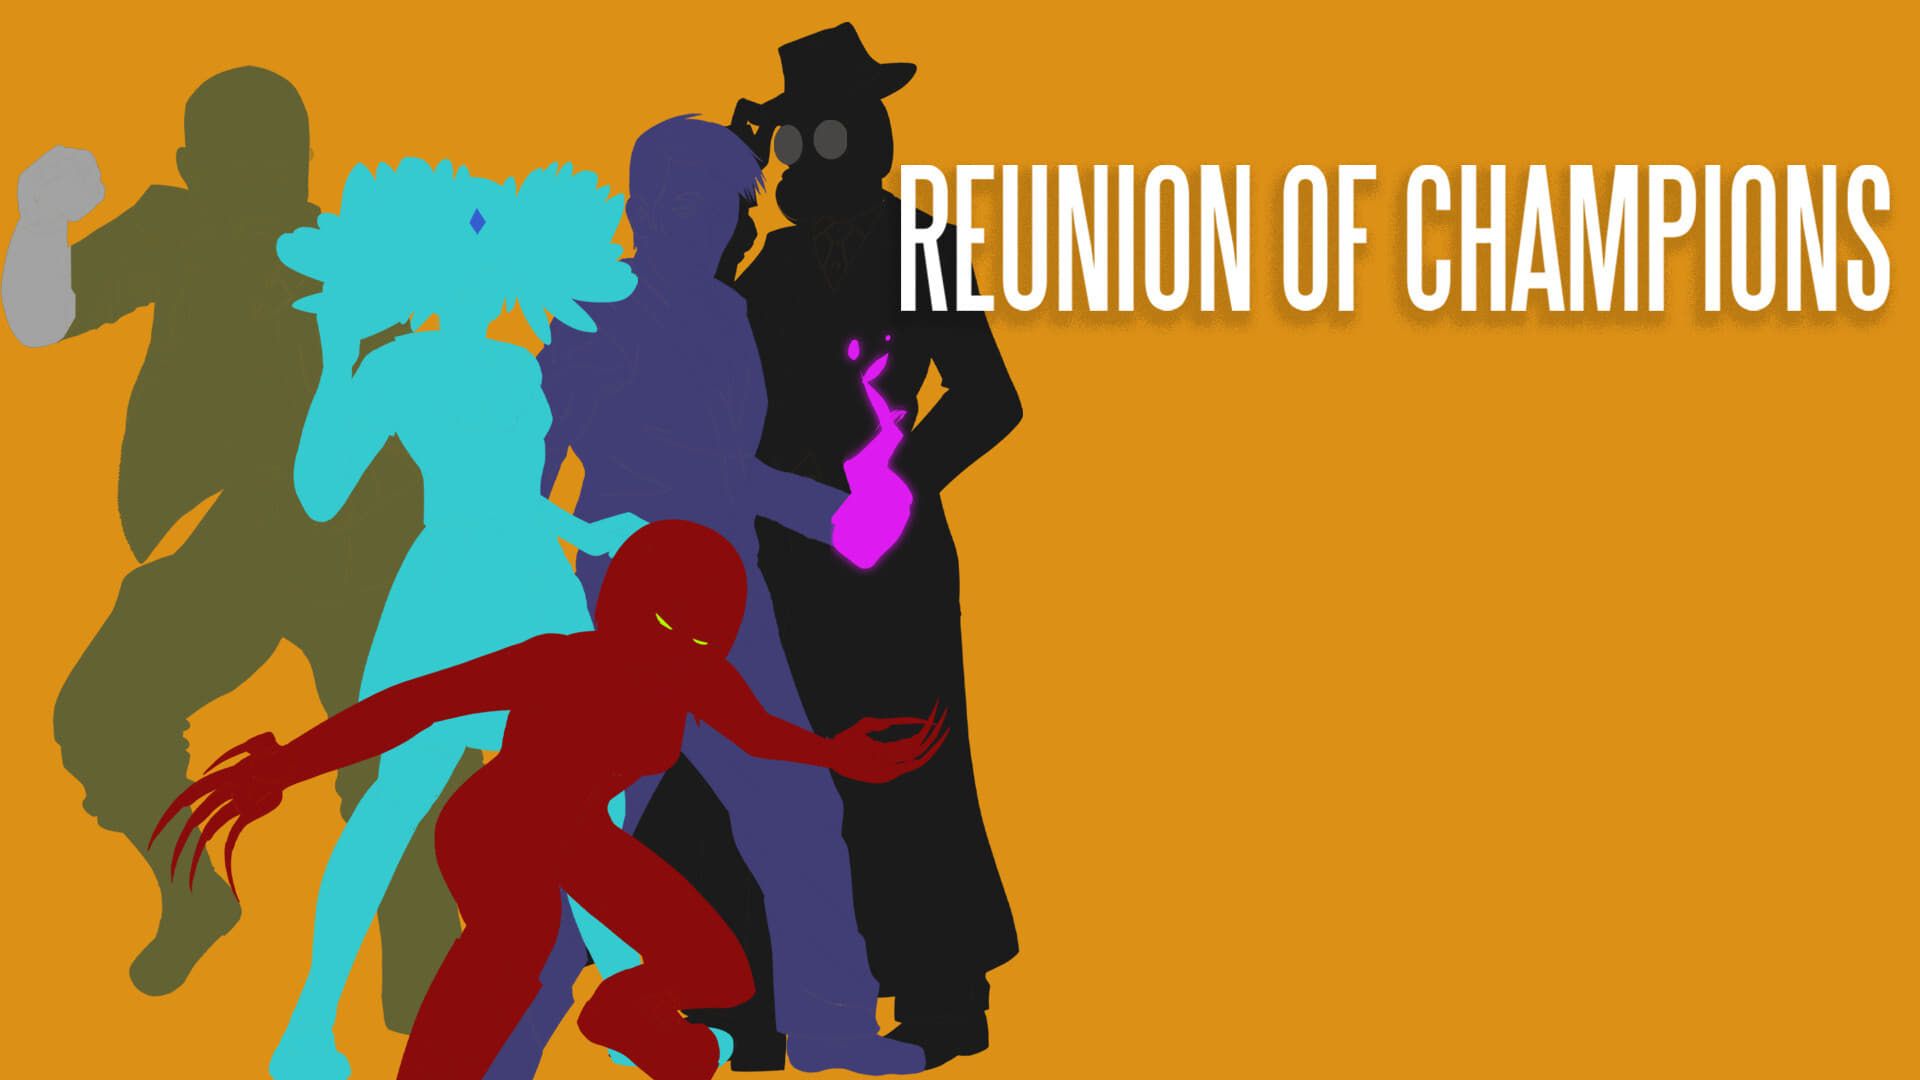 Reunion of Champions background